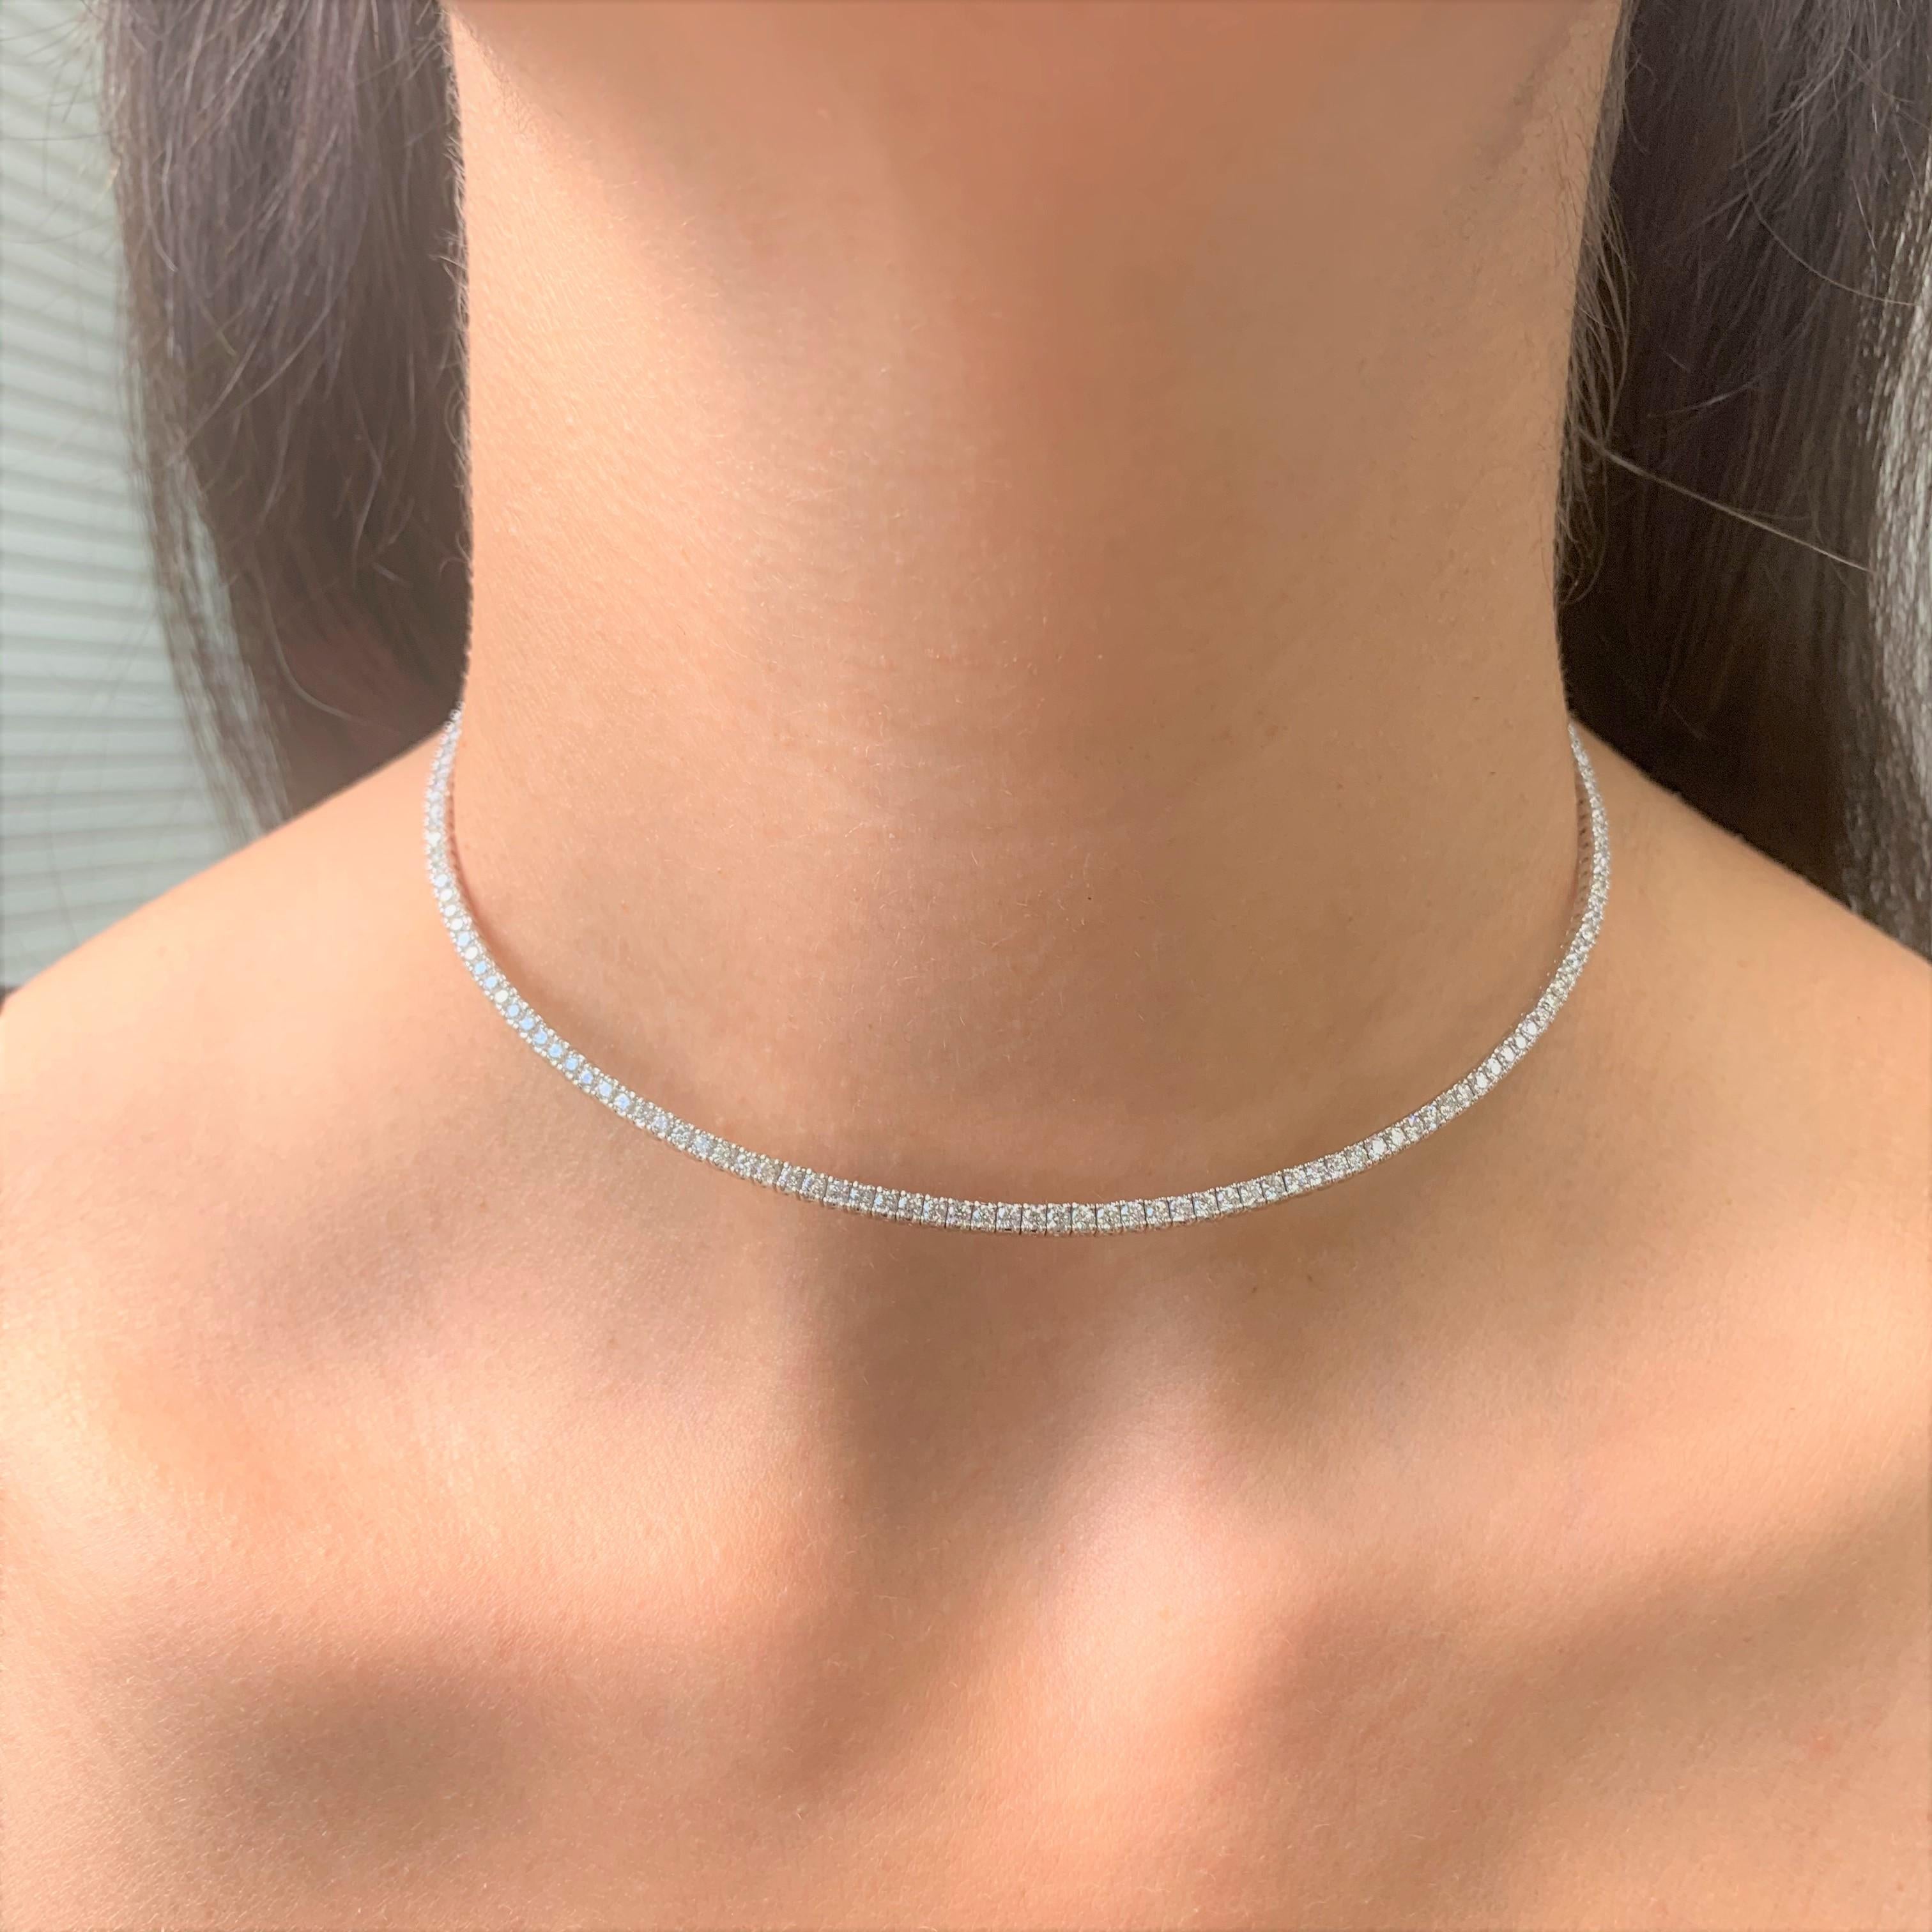 This is a Beautfiul Diamond Choker Collar Necklace which is adjustable for comfort. Crafted of 14K White Gold features 136 Natural Round Diamonds weighing 3.56 carats 100mm Length. Claw Clasp Closure
-14K White Gold
-136 Natural White Round